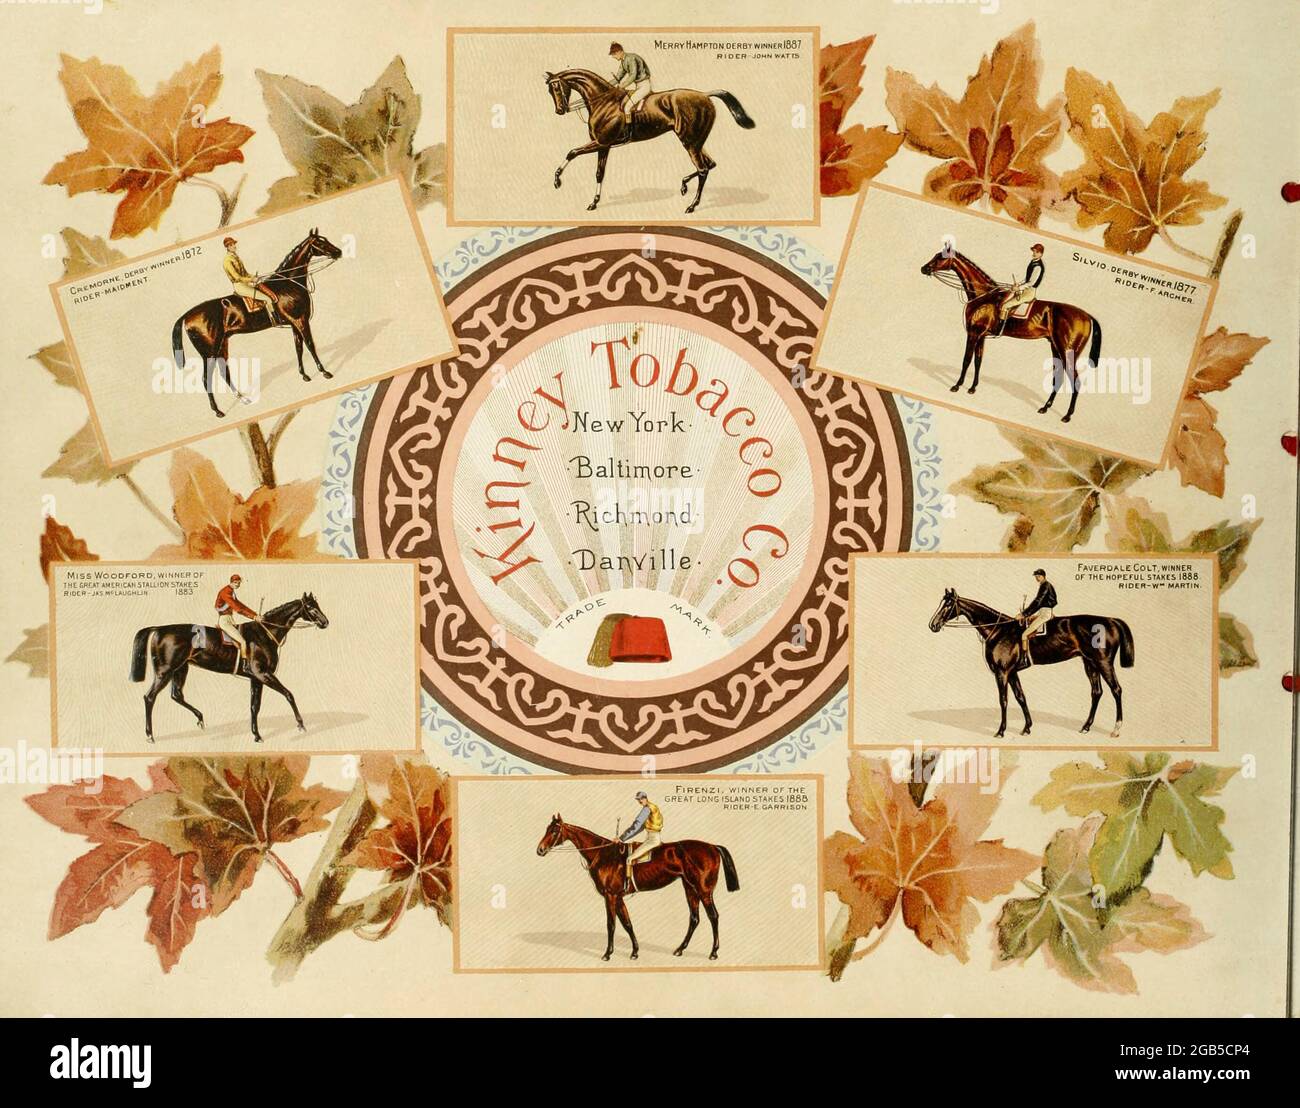 Horse racing trading cards from the ' Album of celebrated American and English running horses ' by Kinney Bros Published in New Your in 1888 By Kinney Brothers to advance the sales of their cigarette brands. The Kinney Tobacco Company was an American cigarette manufacturing firm that created the Sweet Caporal cigarette brand and promoted it with collectible trading cards. Being a leading cigarette manufacturer of the 1870-1880s, it merged in 1890 into the American Tobacco Company. Stock Photo